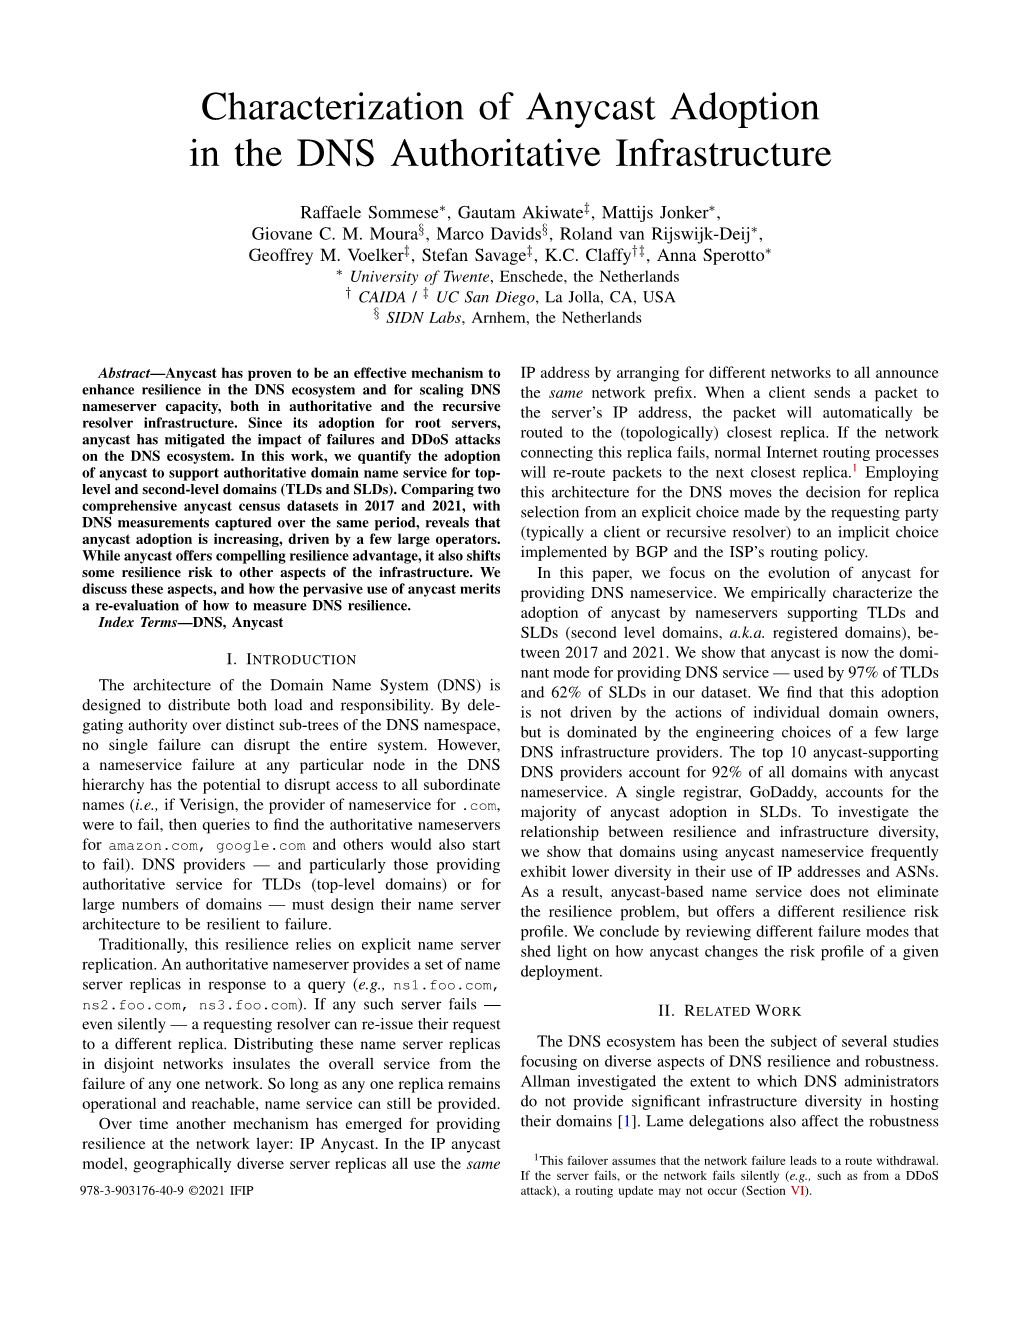 Characterization of Anycast Adoption in the DNS Authoritative Infrastructure